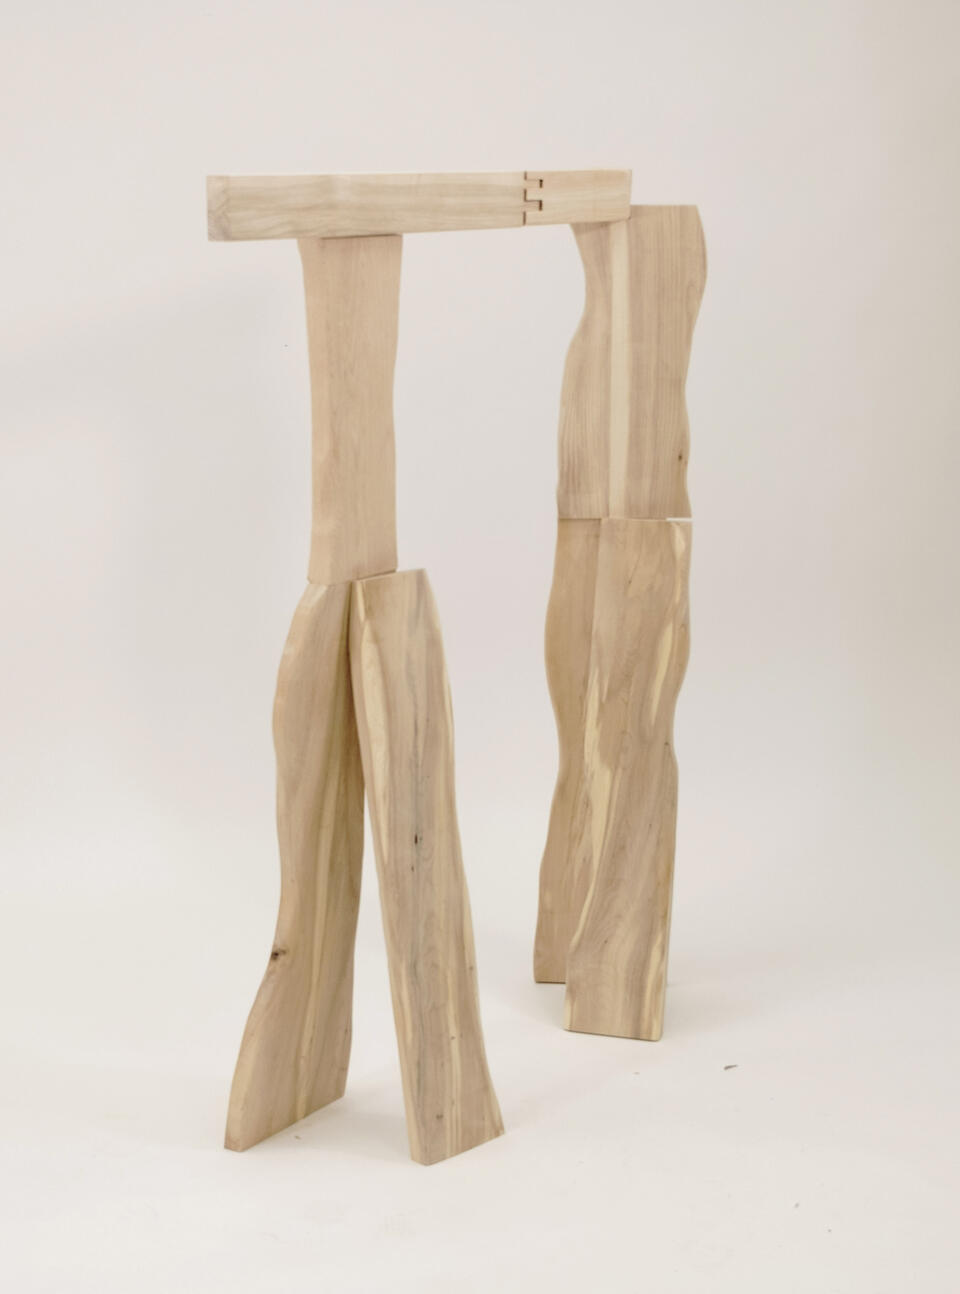 A wooden coat rack inspired by the standing posture of a person in a living room, made from three different types of wood.